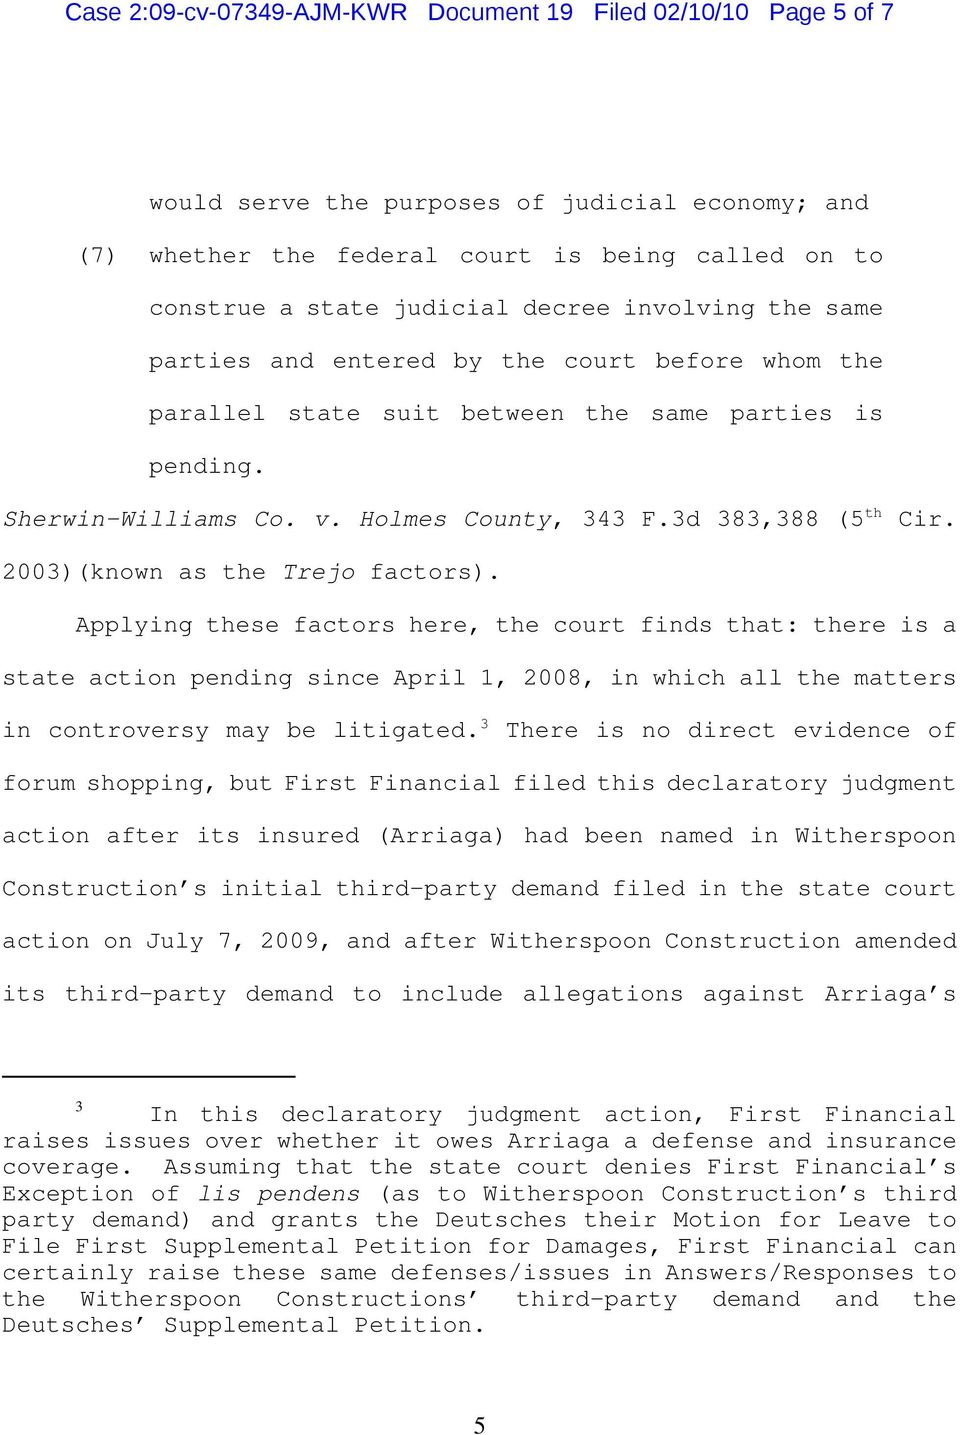 2003)(known as the Trejo factors). Applying these factors here, the court finds that: there is a state action pending since April 1, 2008, in which all the matters in controversy may be litigated.